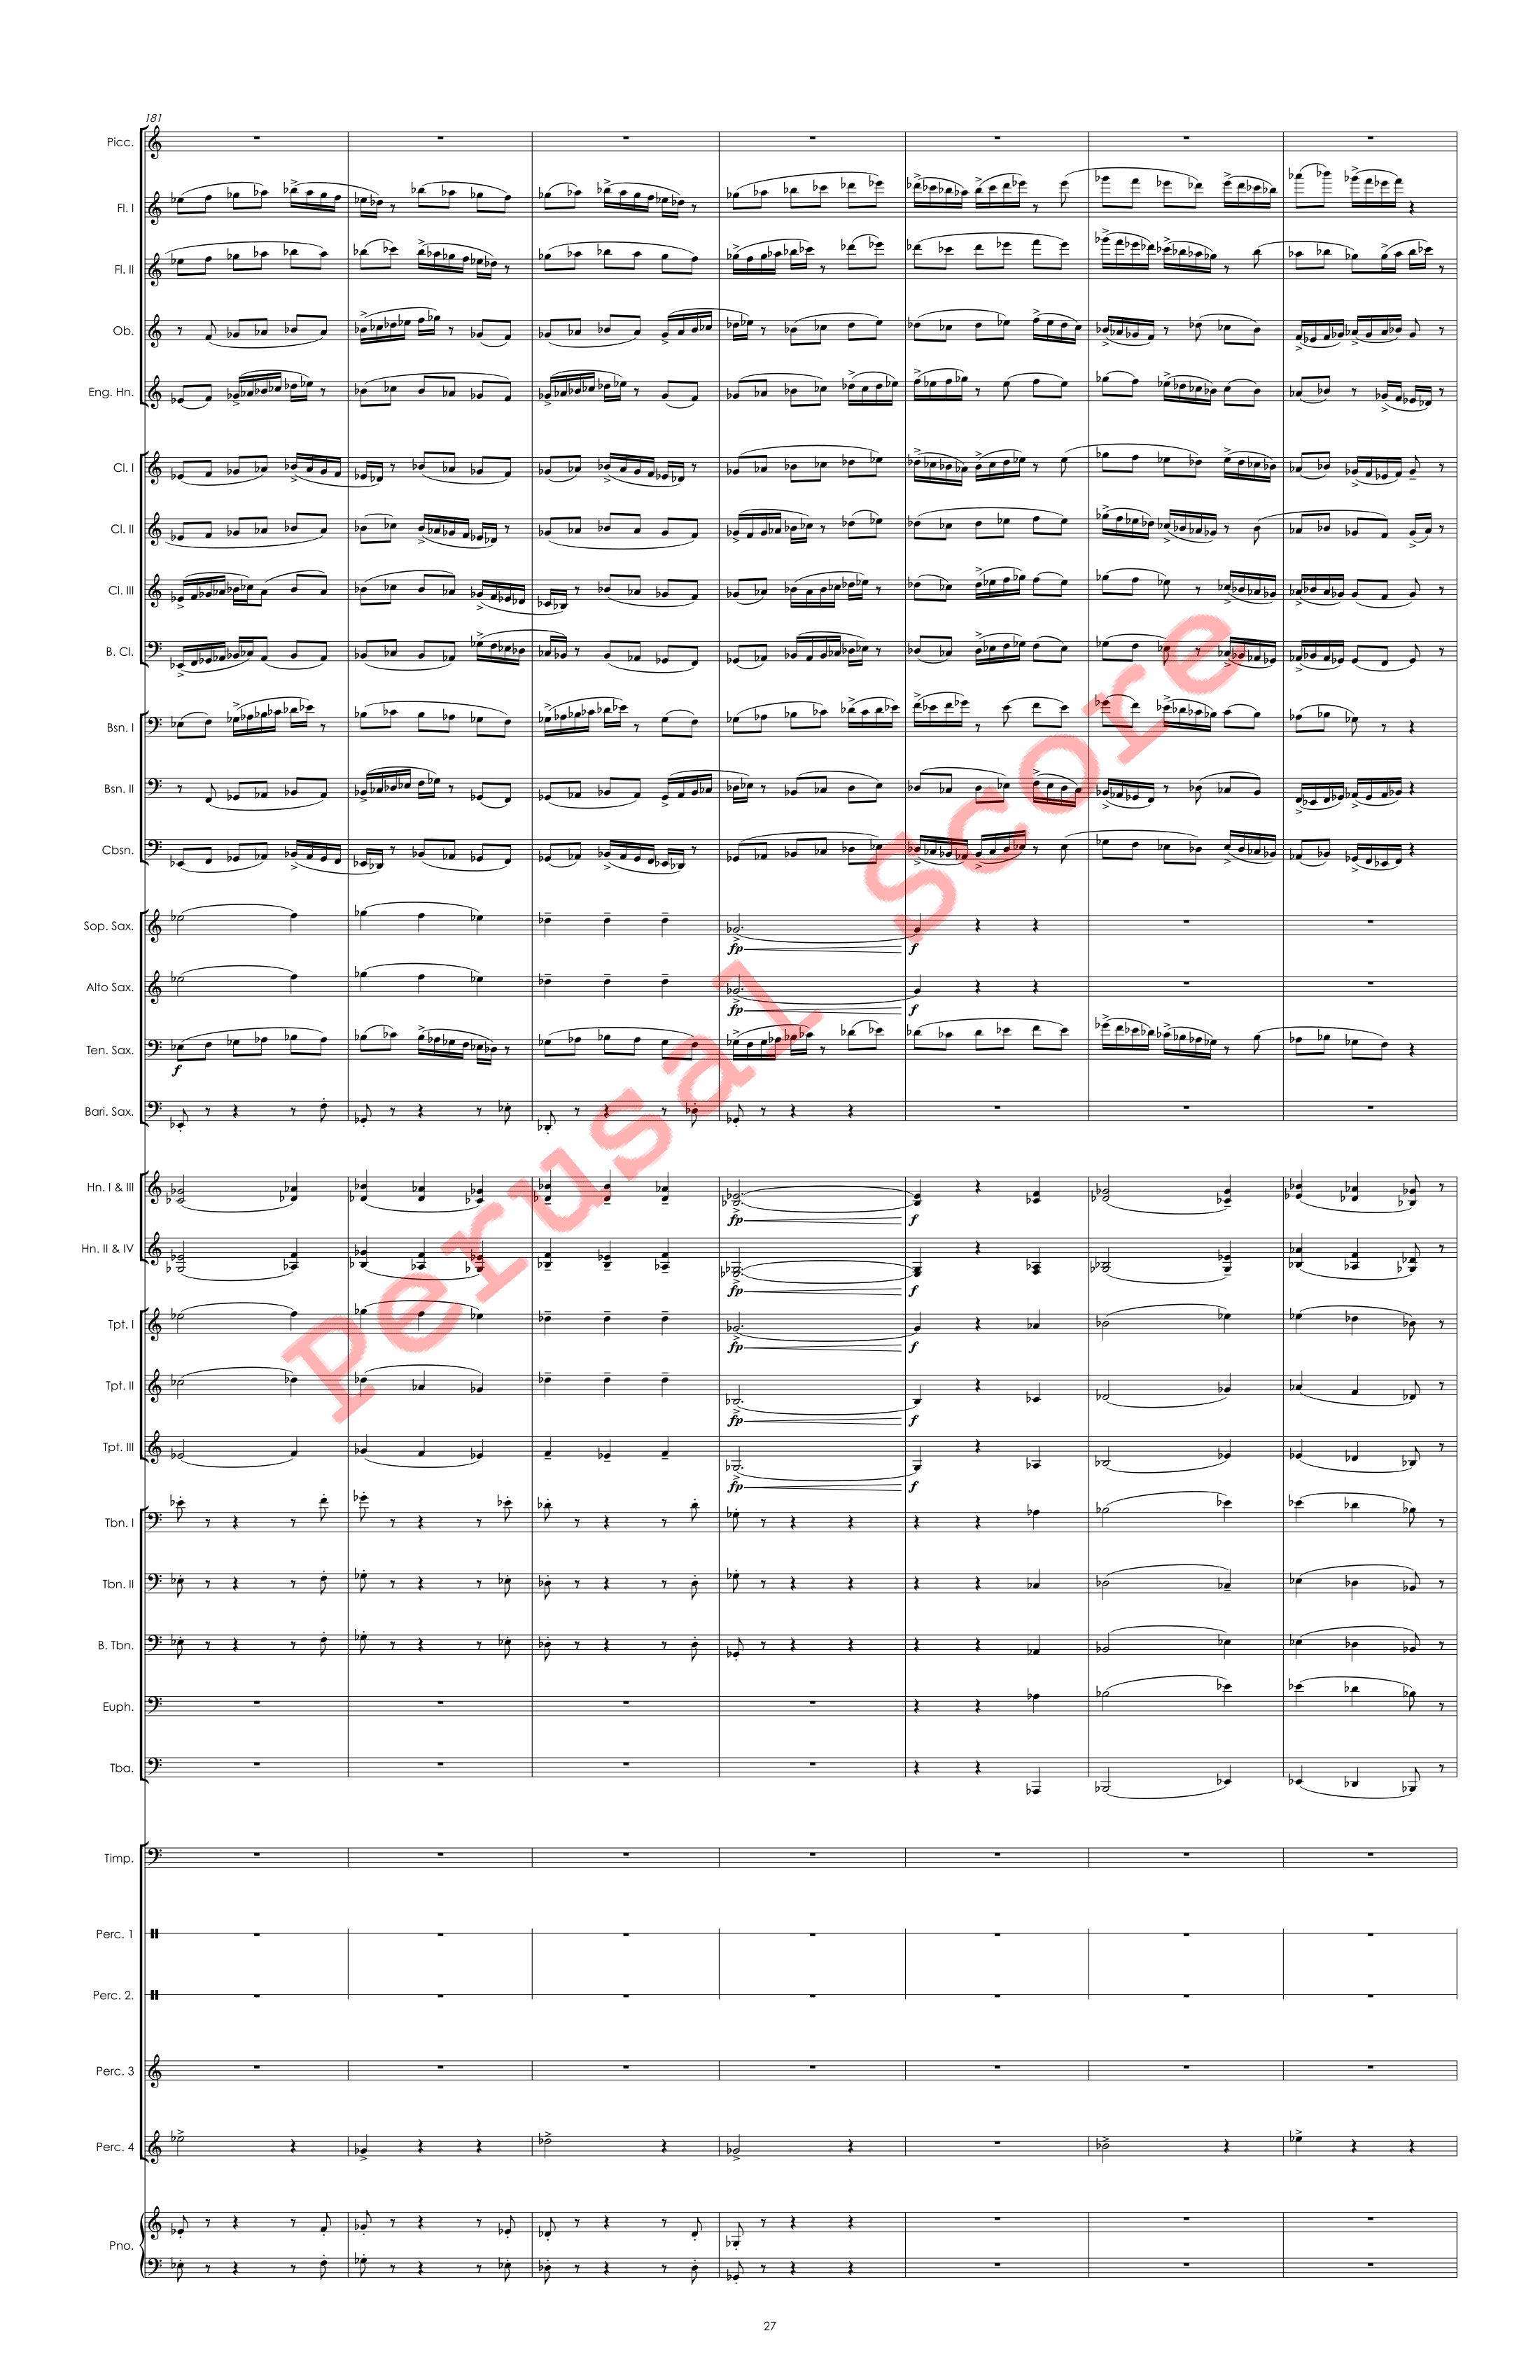 Canadian Folk Song - FINISHED 4.18.23- Full Score perusal score-27.png